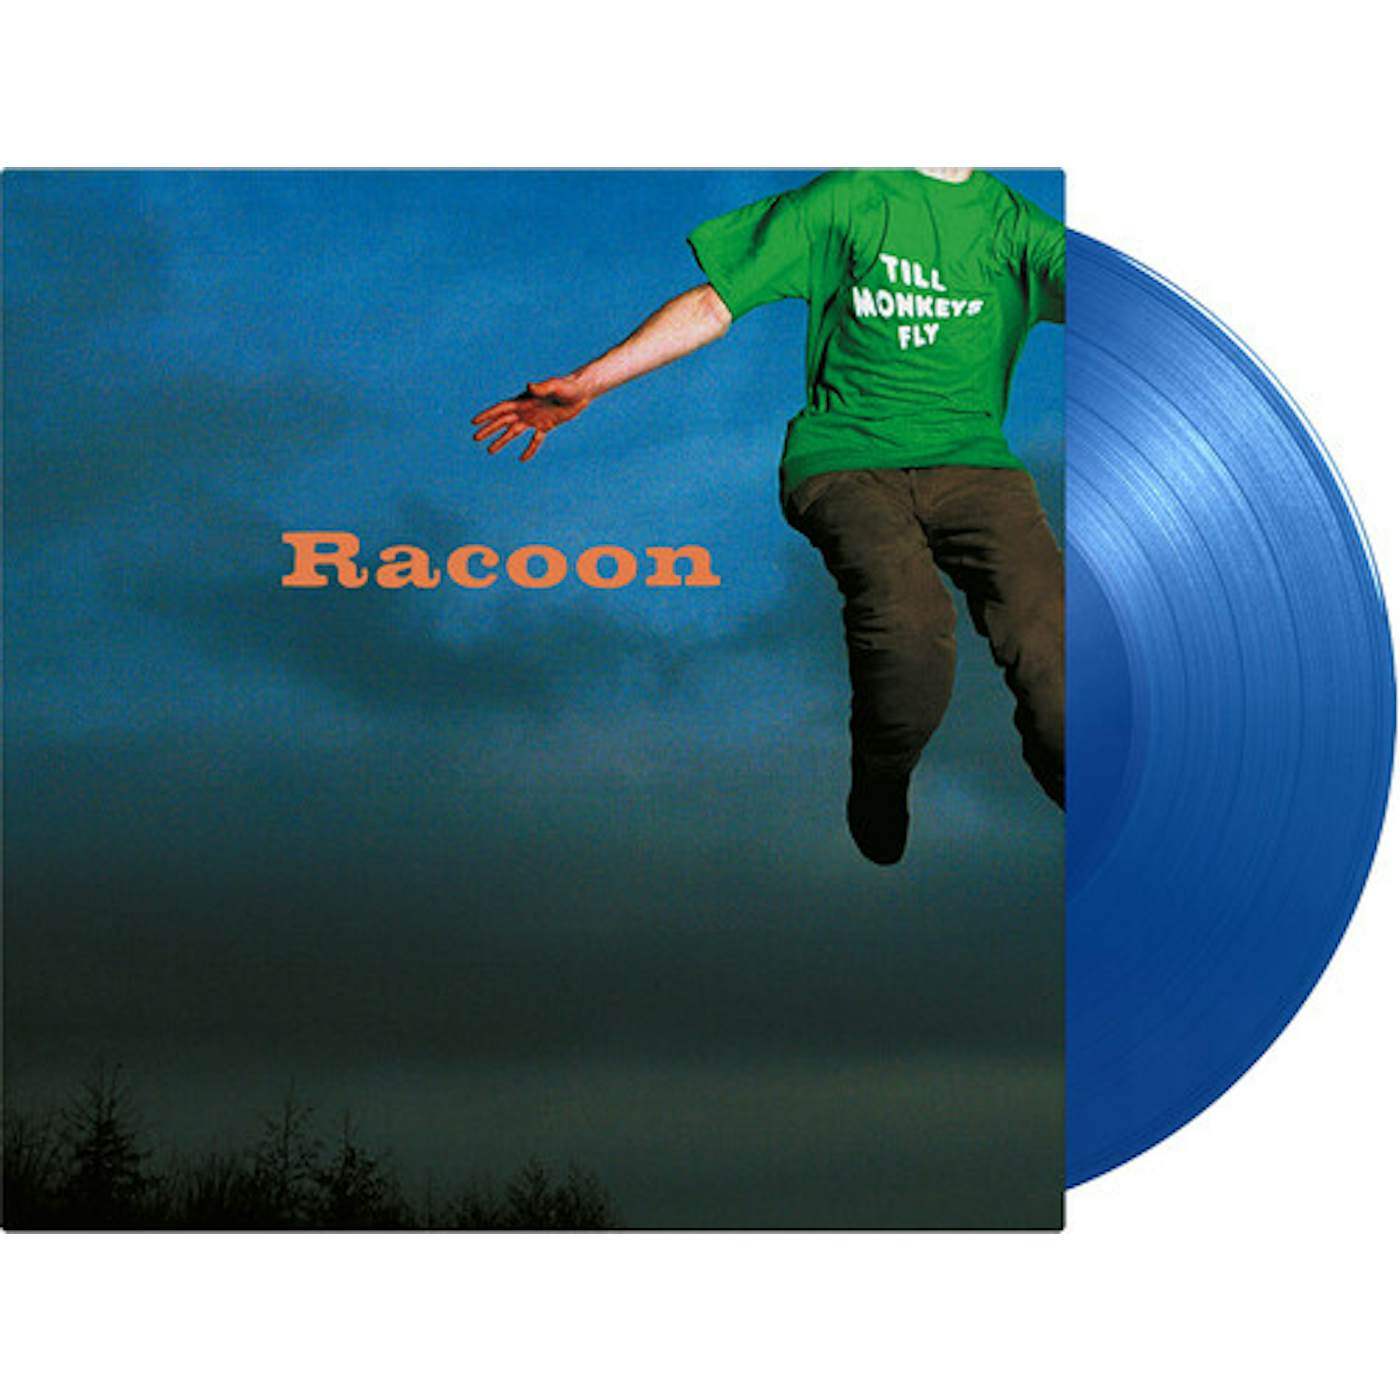 Racoon Till Monkeys Fly (Limited 180G/Blue Colored) Vinyl Record